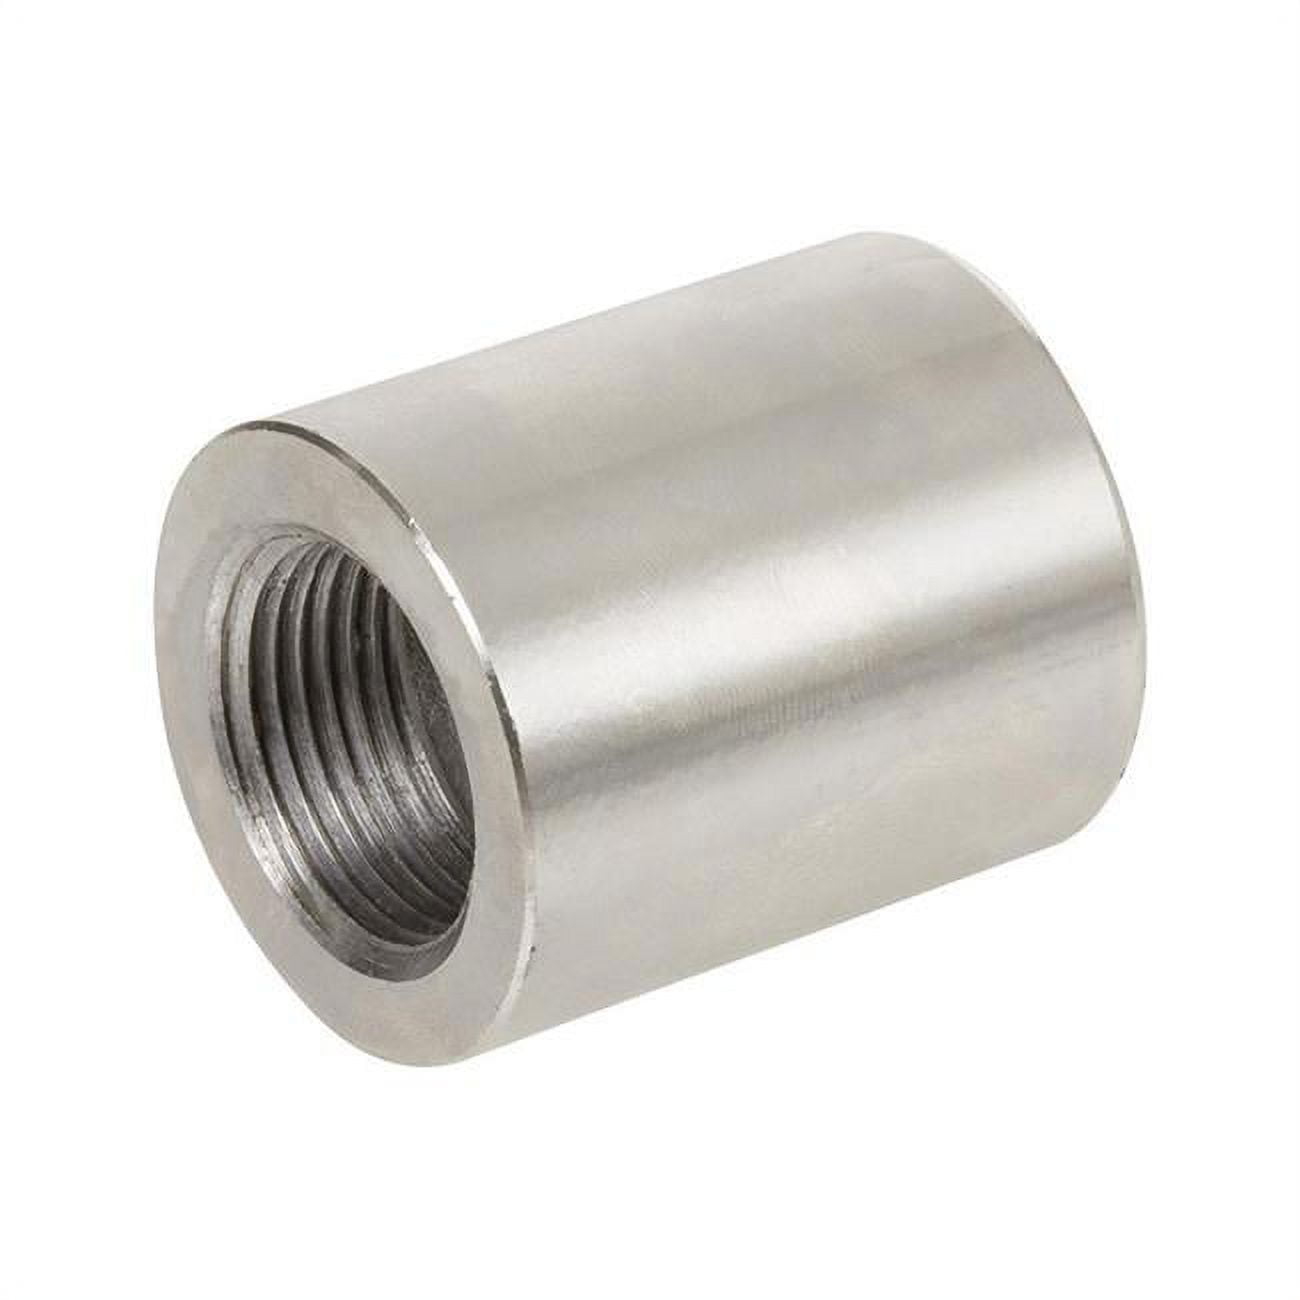 4868212 Stainless Steel Reducing Coupling - 1.25 In. X 0.75 Dia.